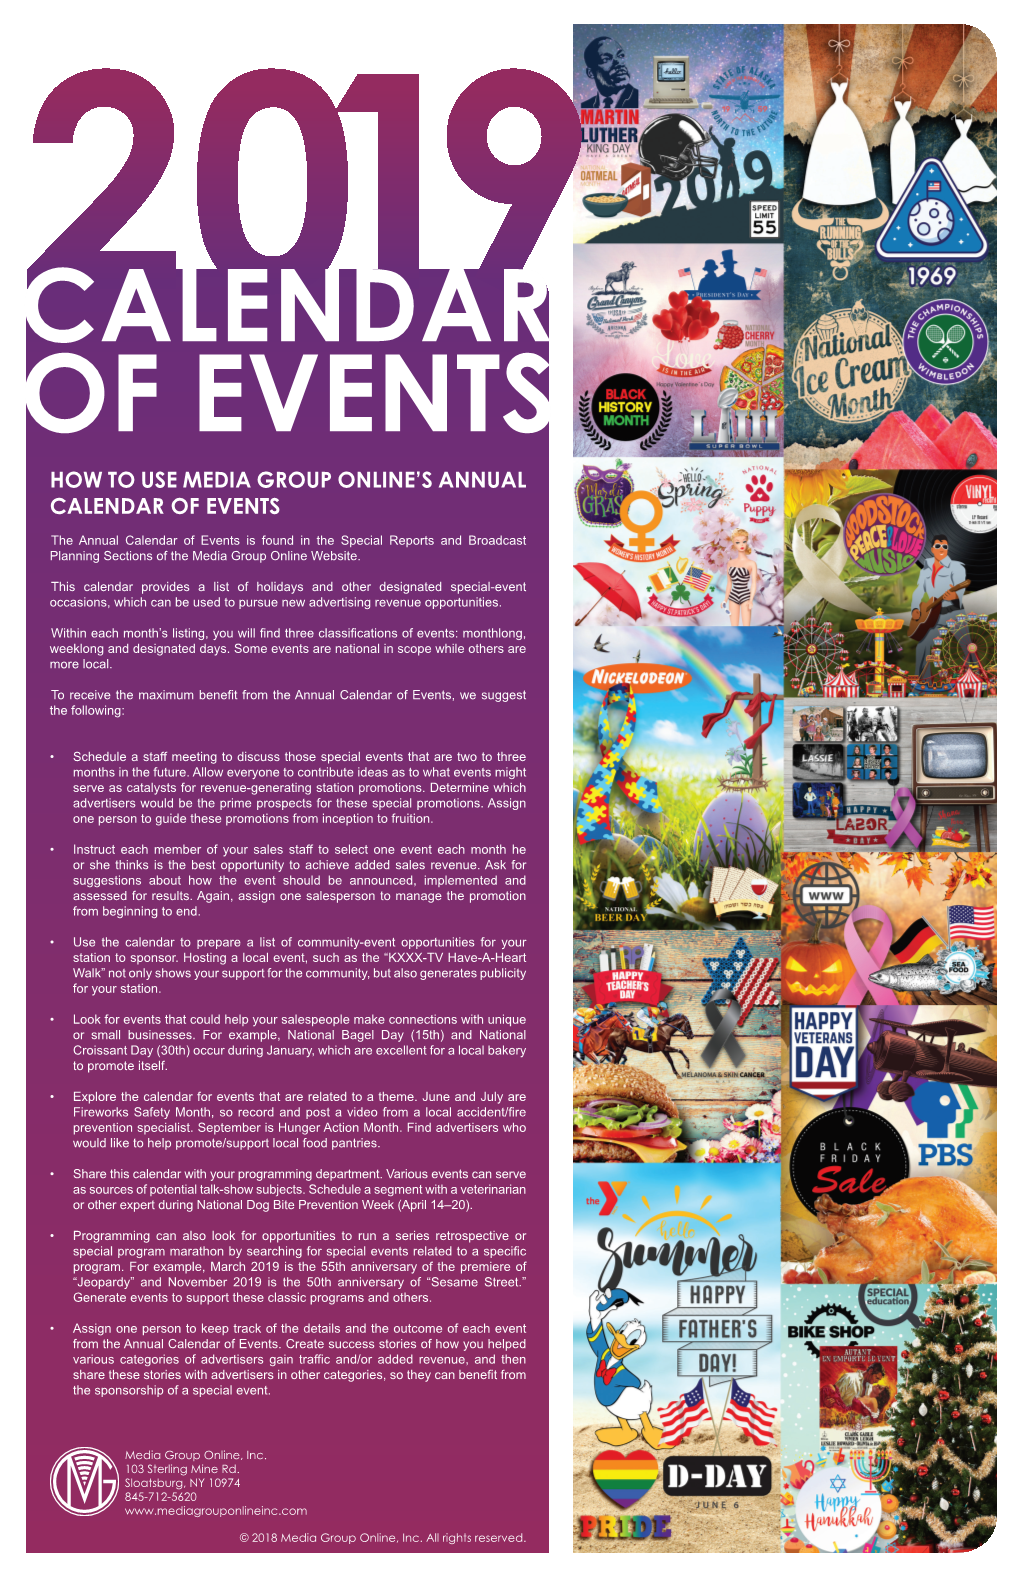 Calendar2 019 of Events How to Use Media Group Online’S Annual Calendar of Events